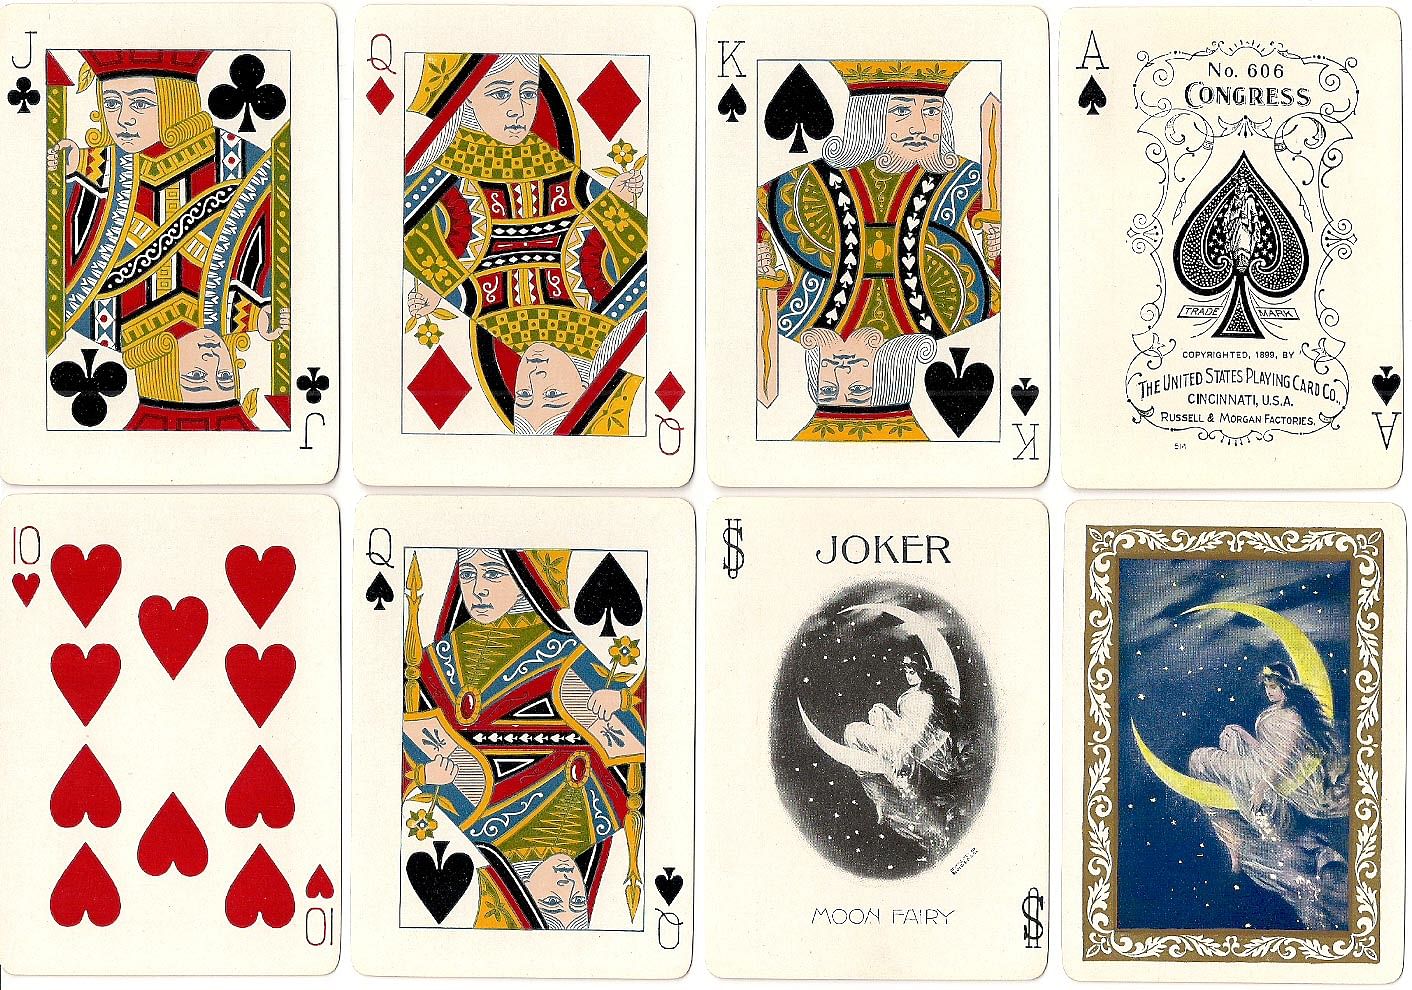 Congress Playing Cards